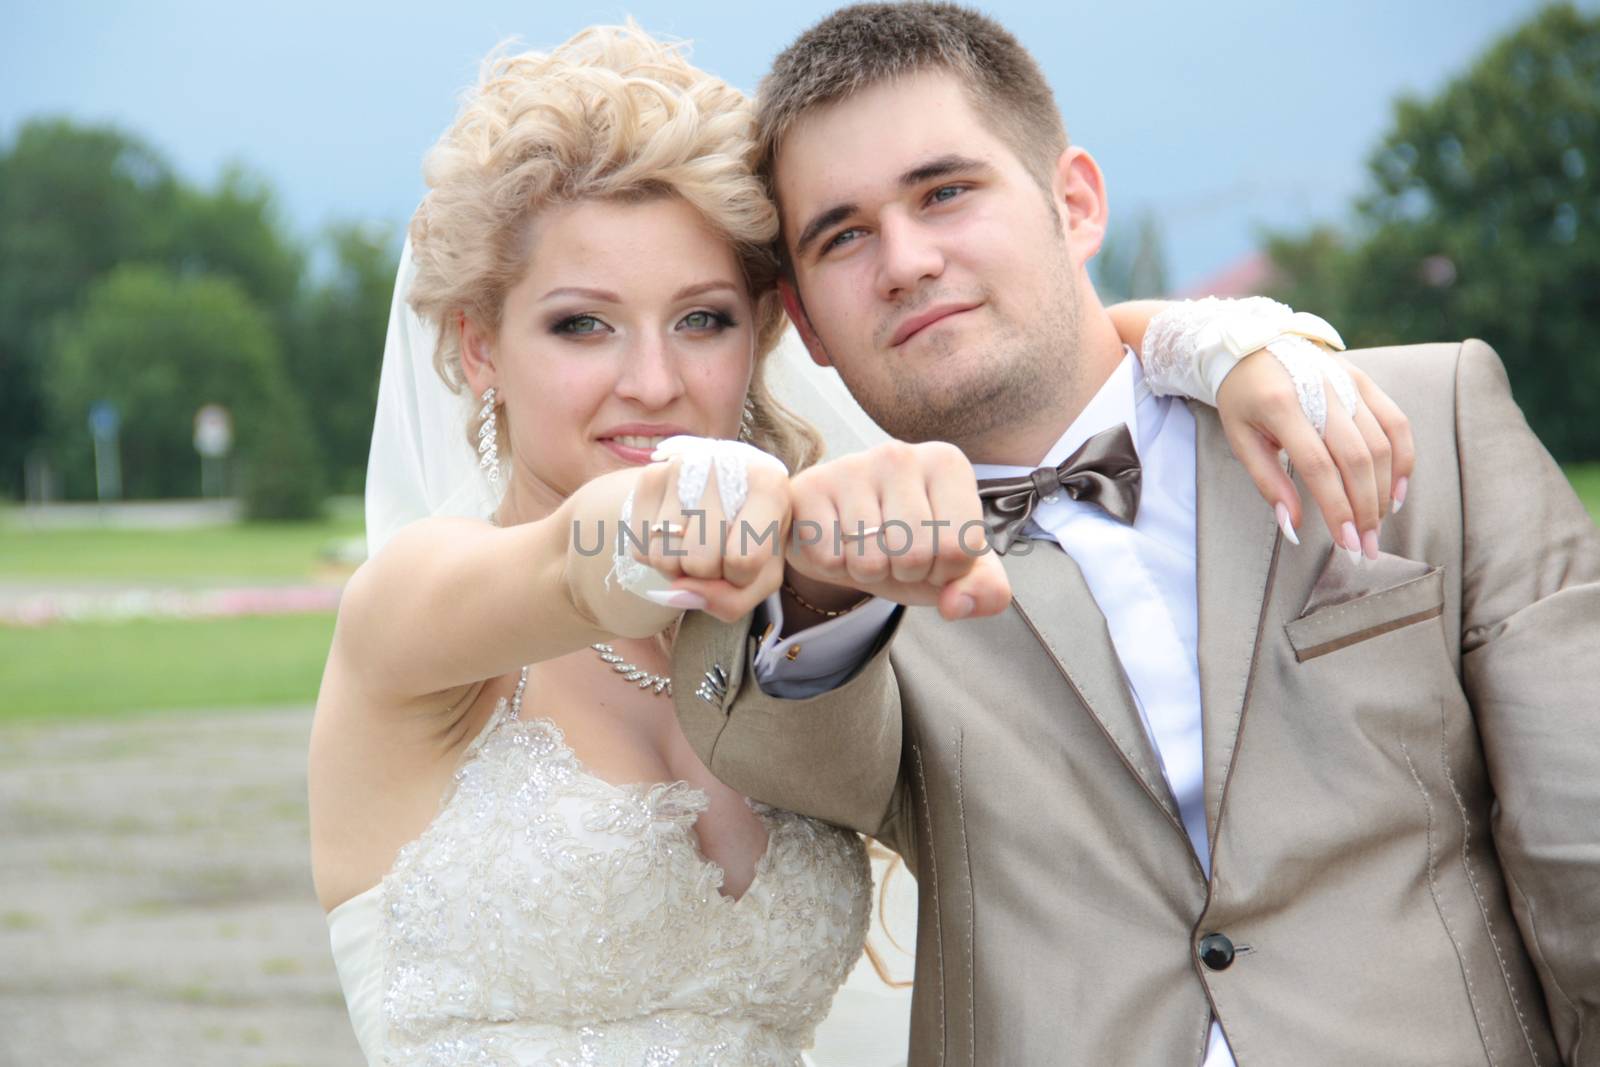 Young married couple in the wedding day